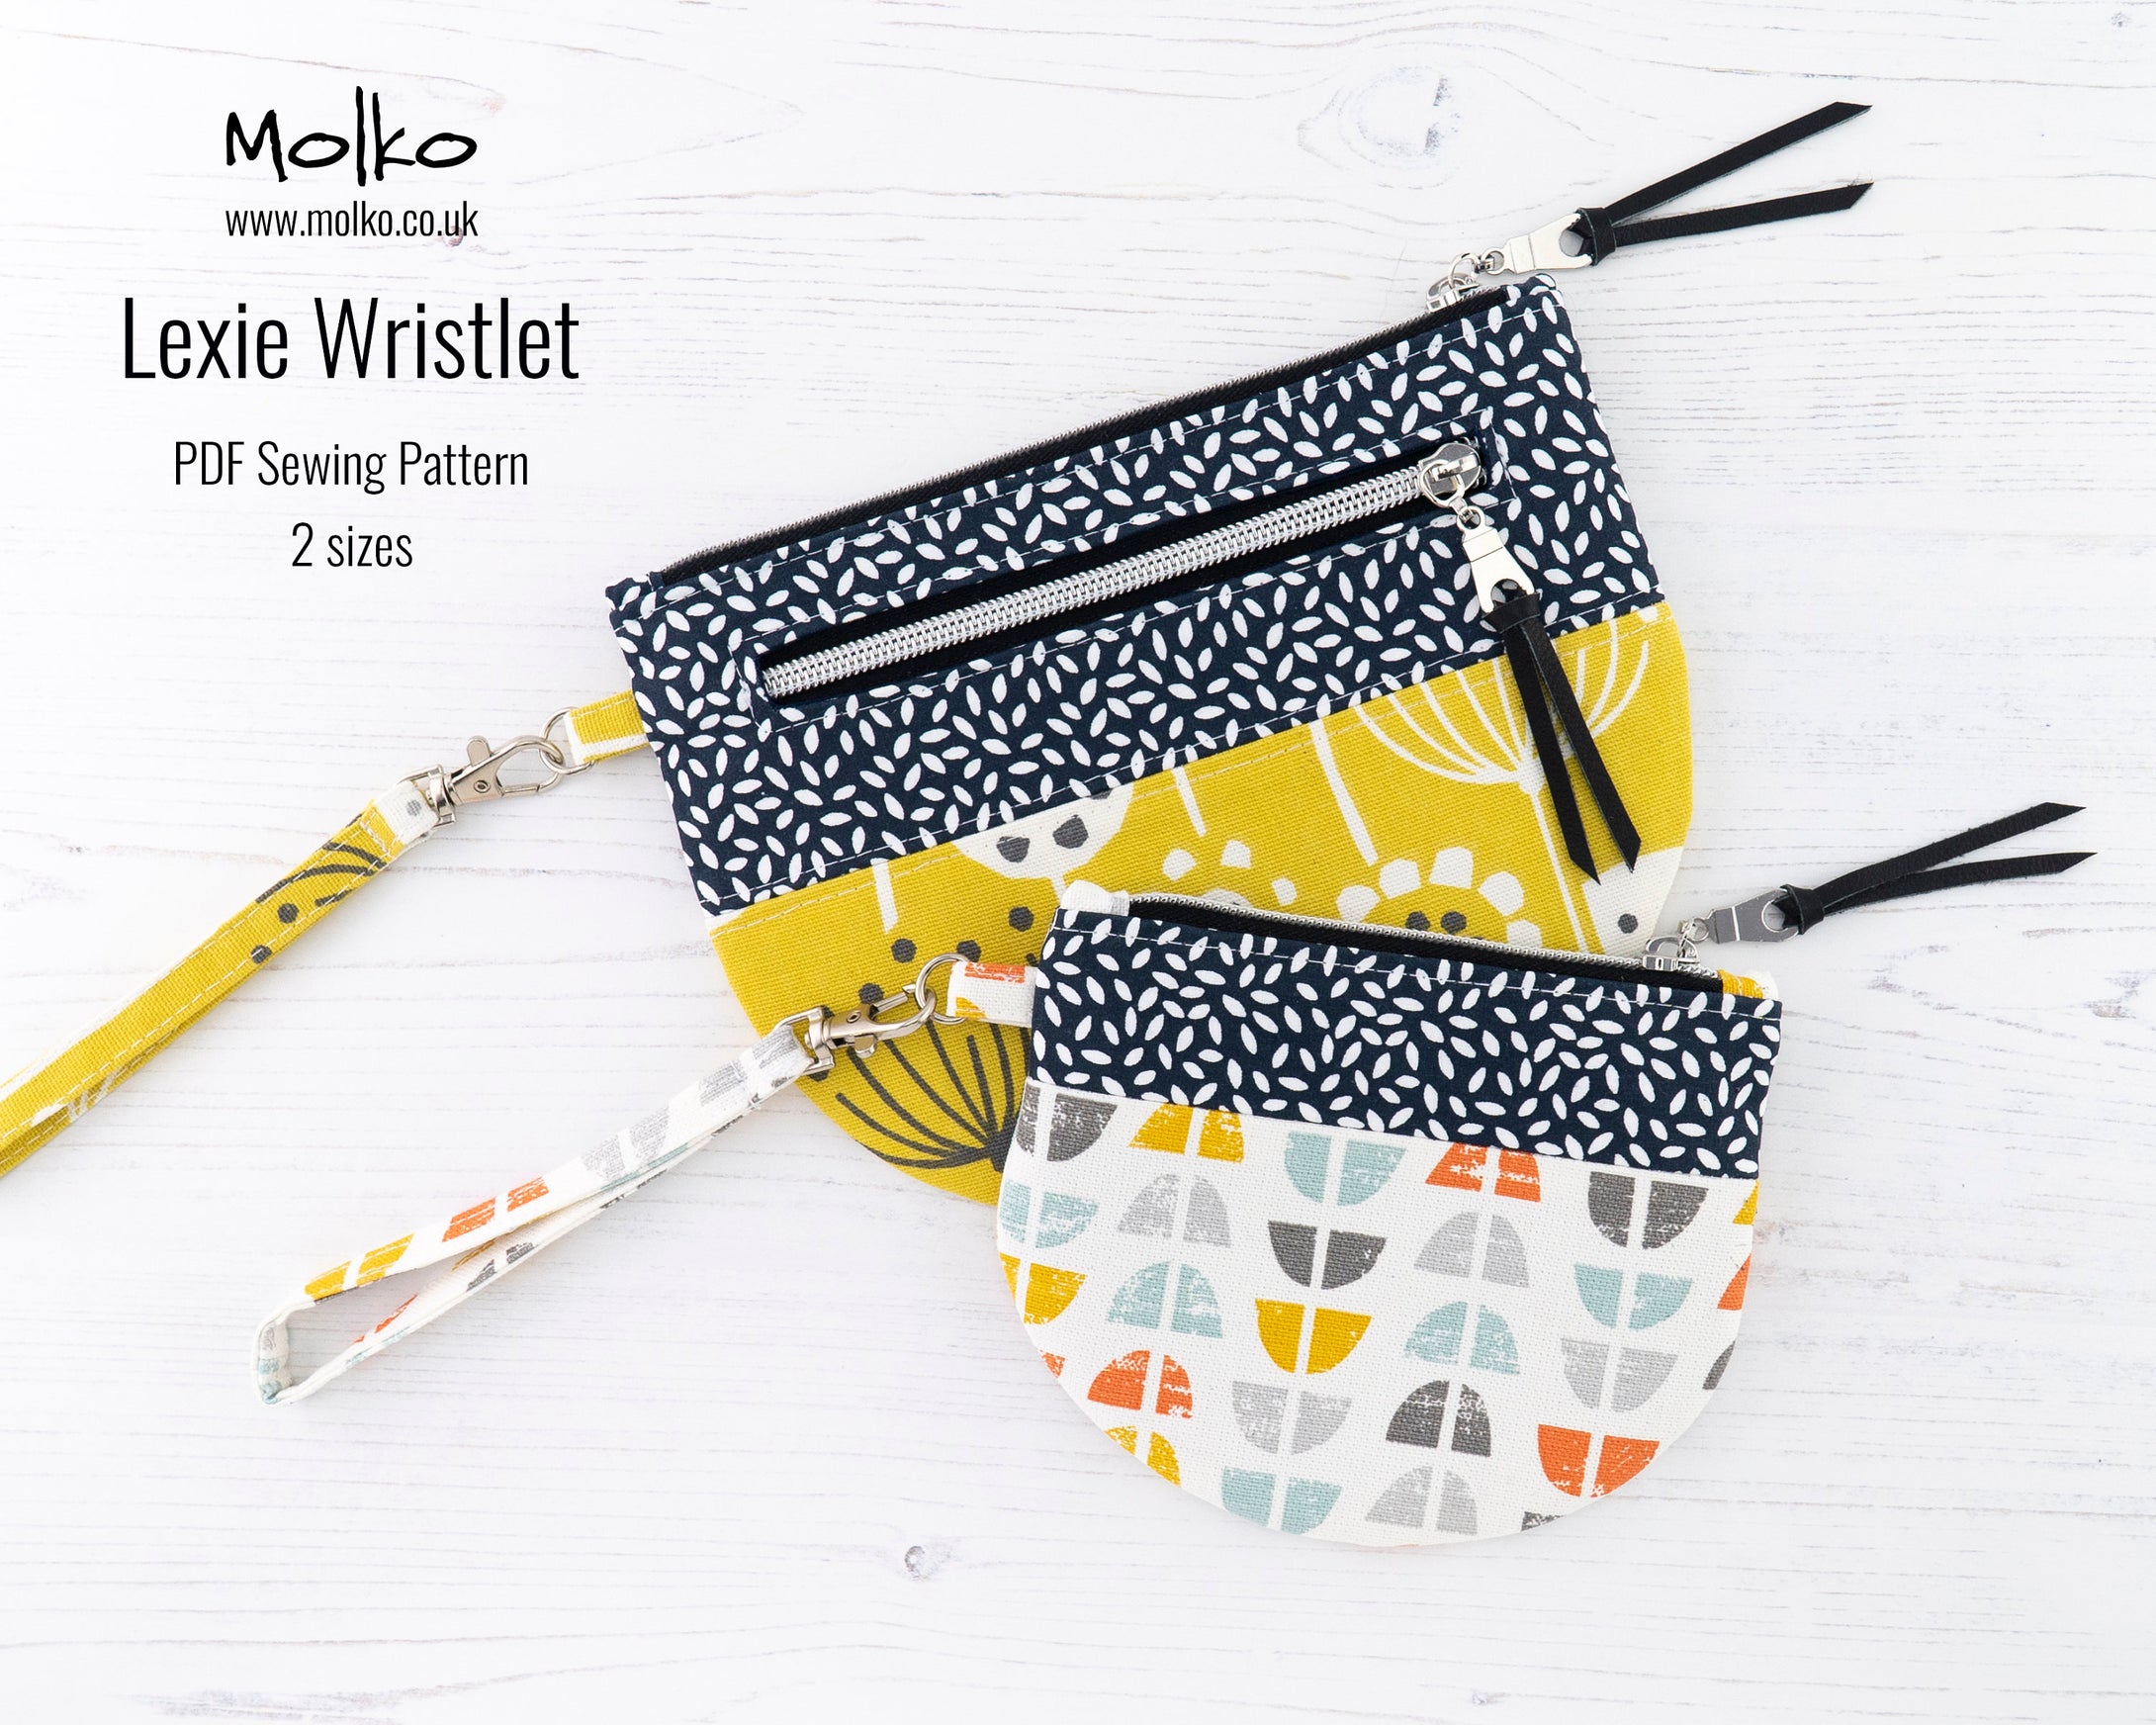 Lexie wristlet pouch PDF sewing tutorial sewing pattern